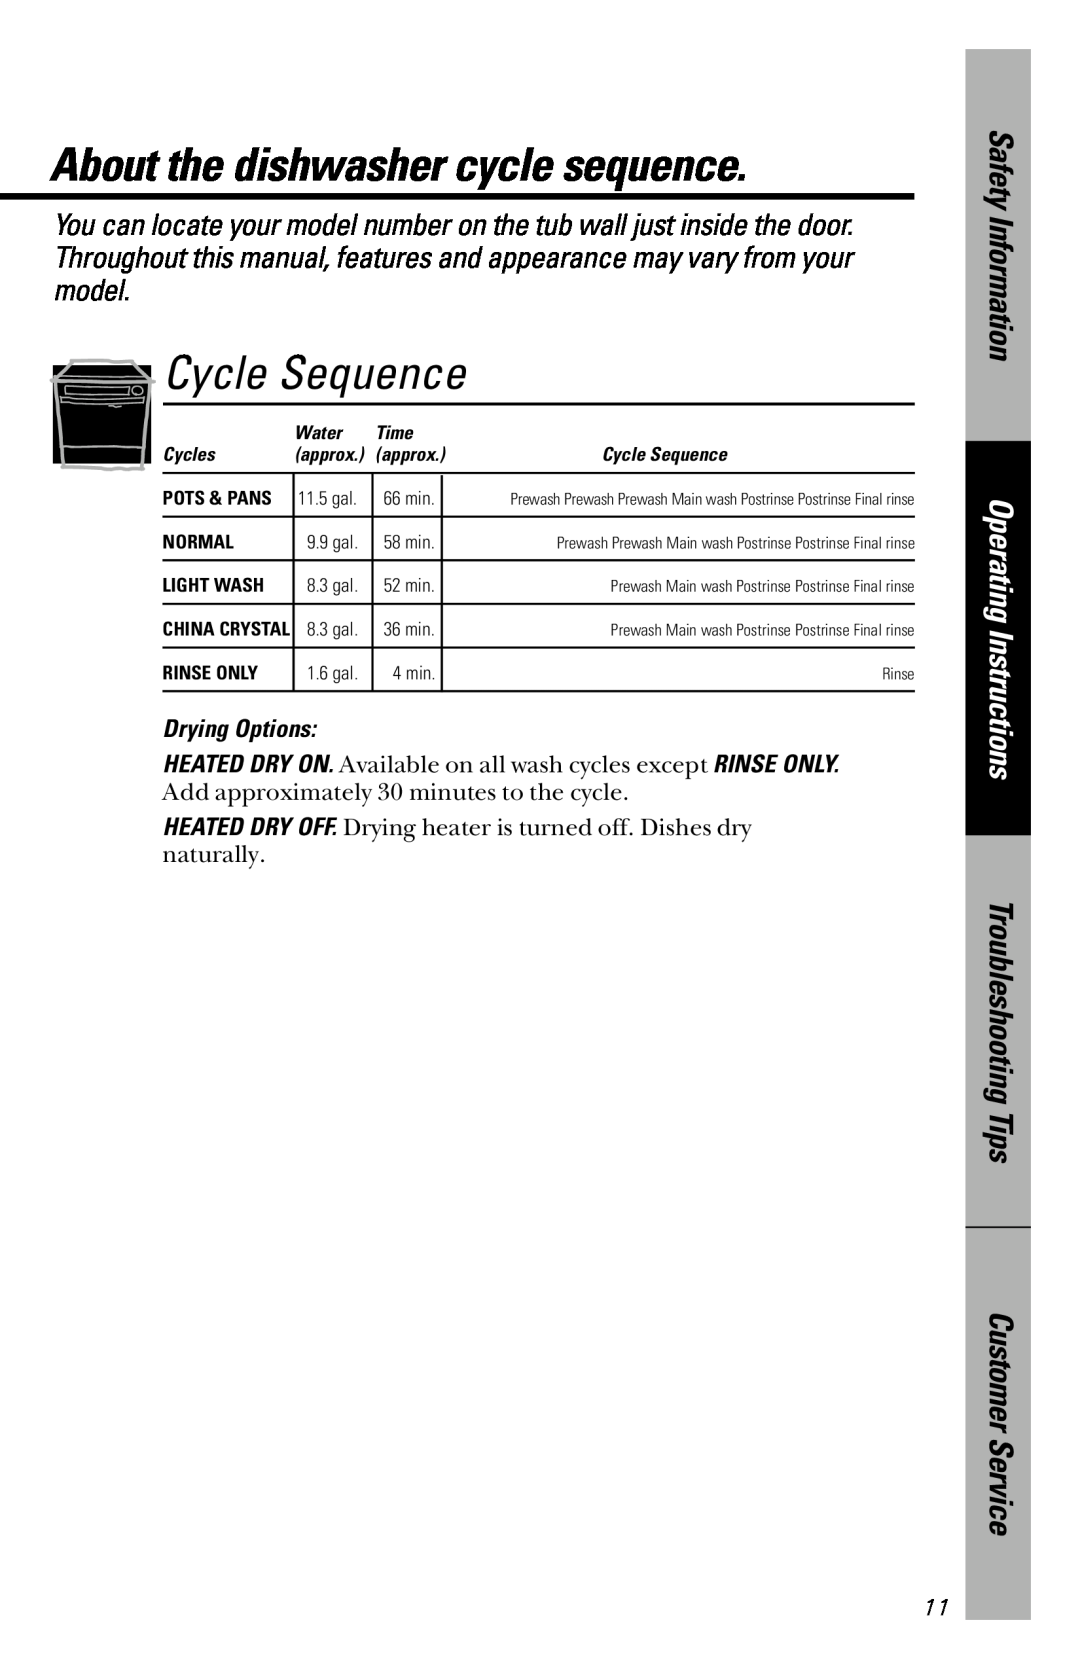 GE EDW2050 About the dishwasher cycle sequence, Cycle Sequence, Drying Options, Safety Information, Operating Instructions 